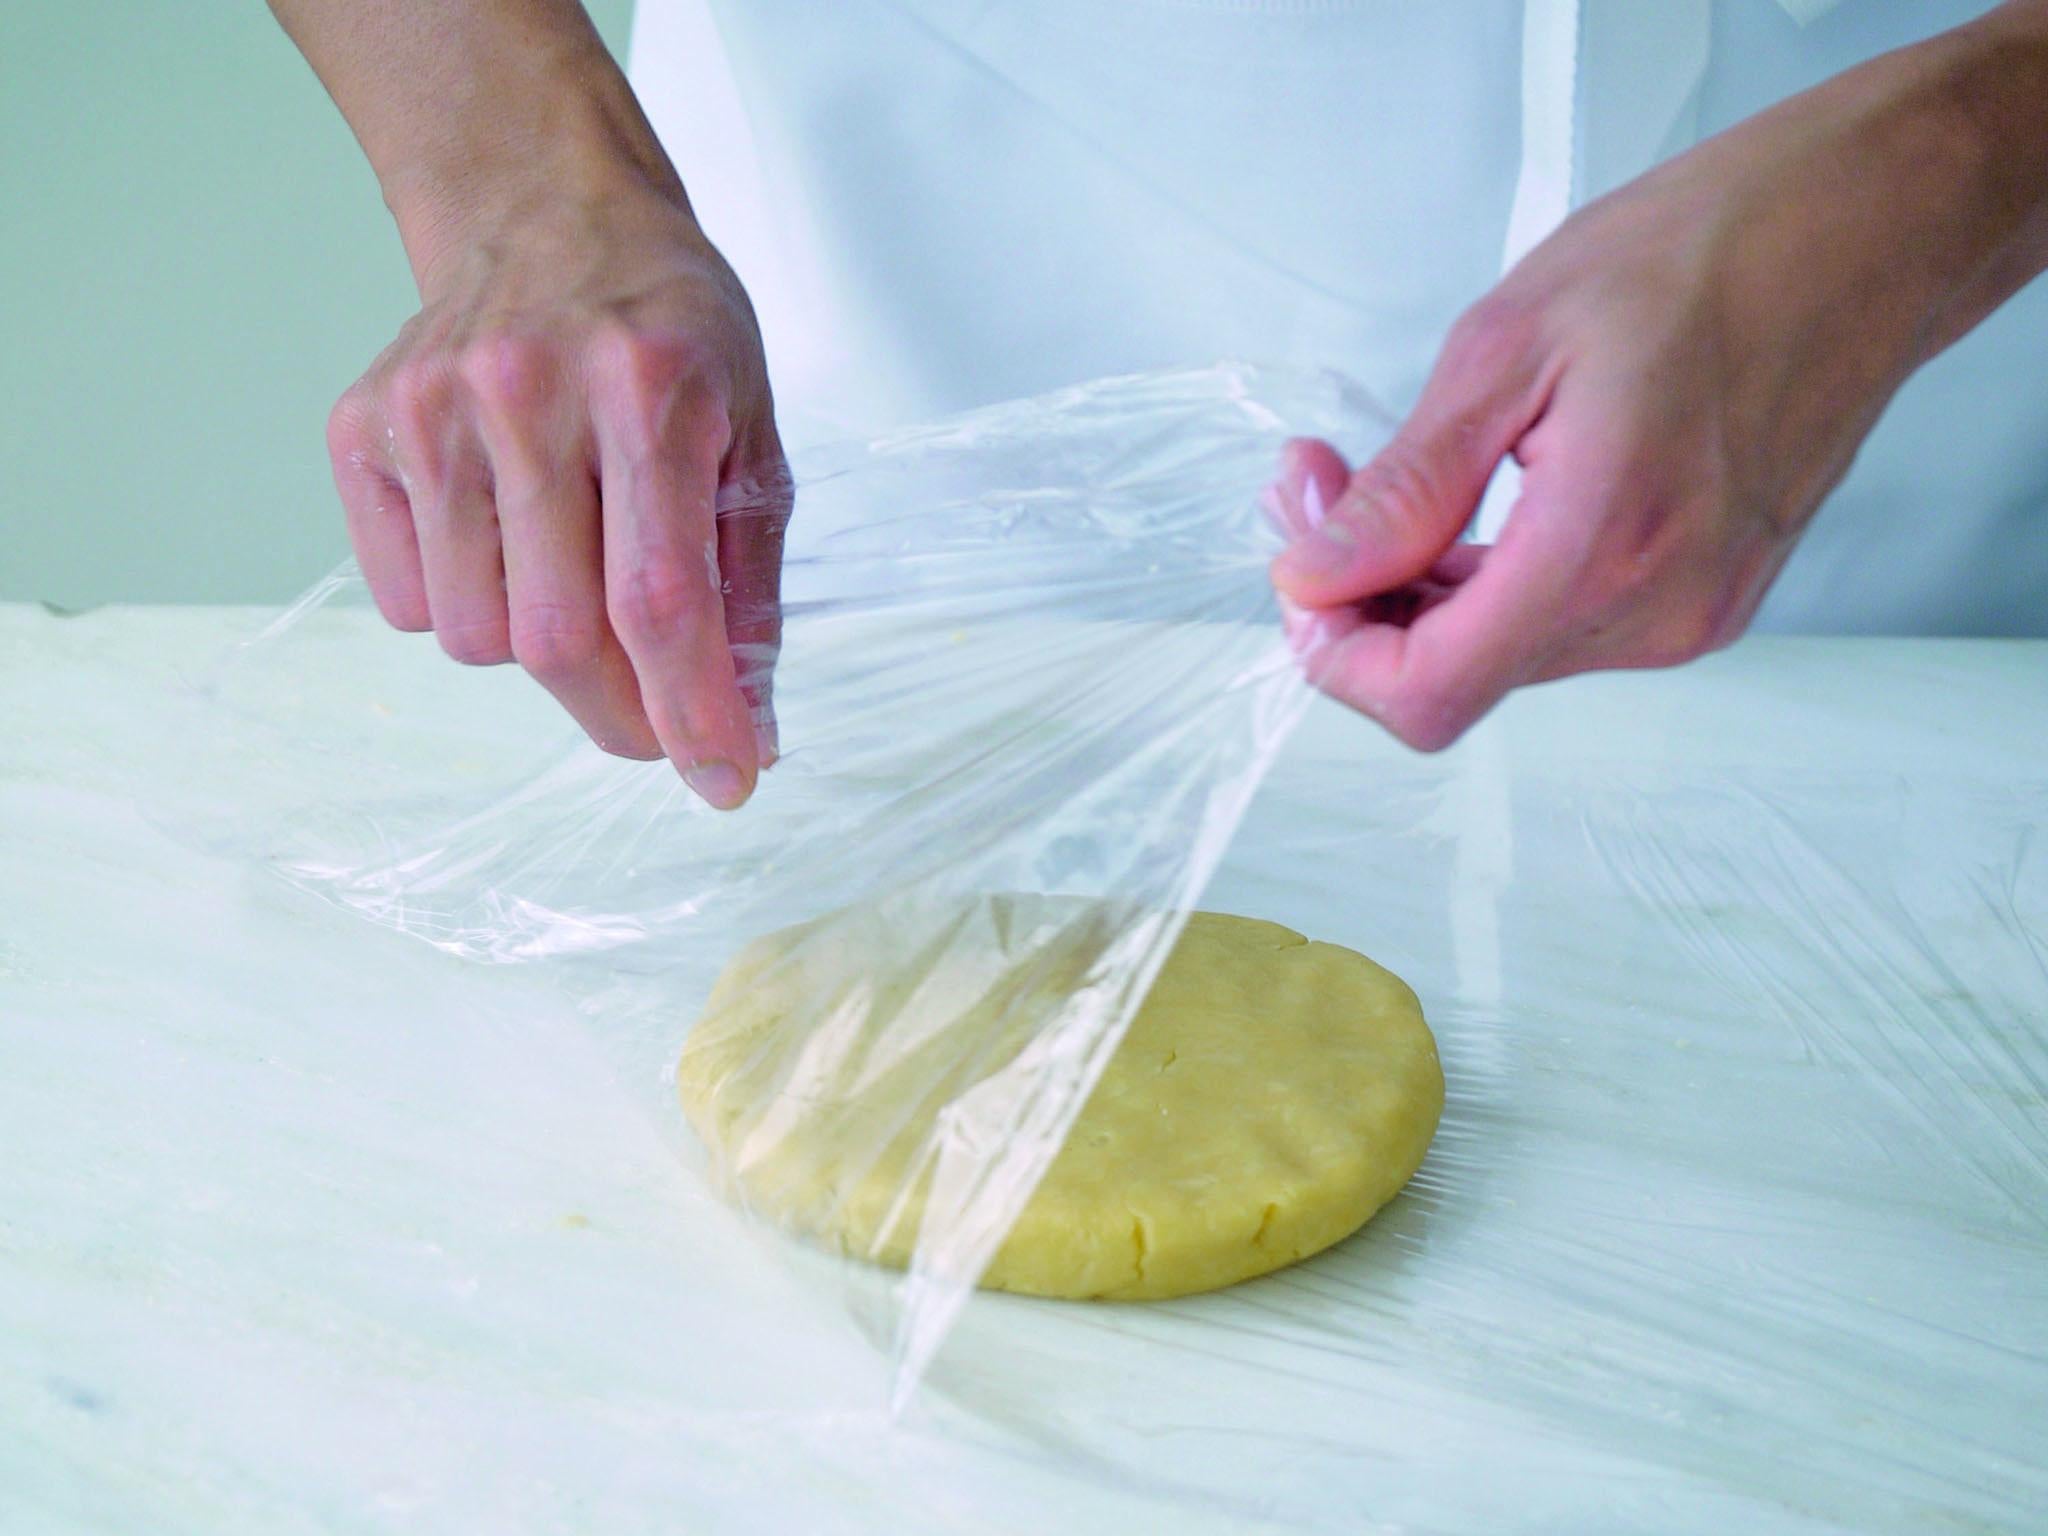 9. Wrap the pastry in cling film and chill for 20-30 minutes before rolling out. This will relax it and prevent too much shrinkage, as well as firm up the butter